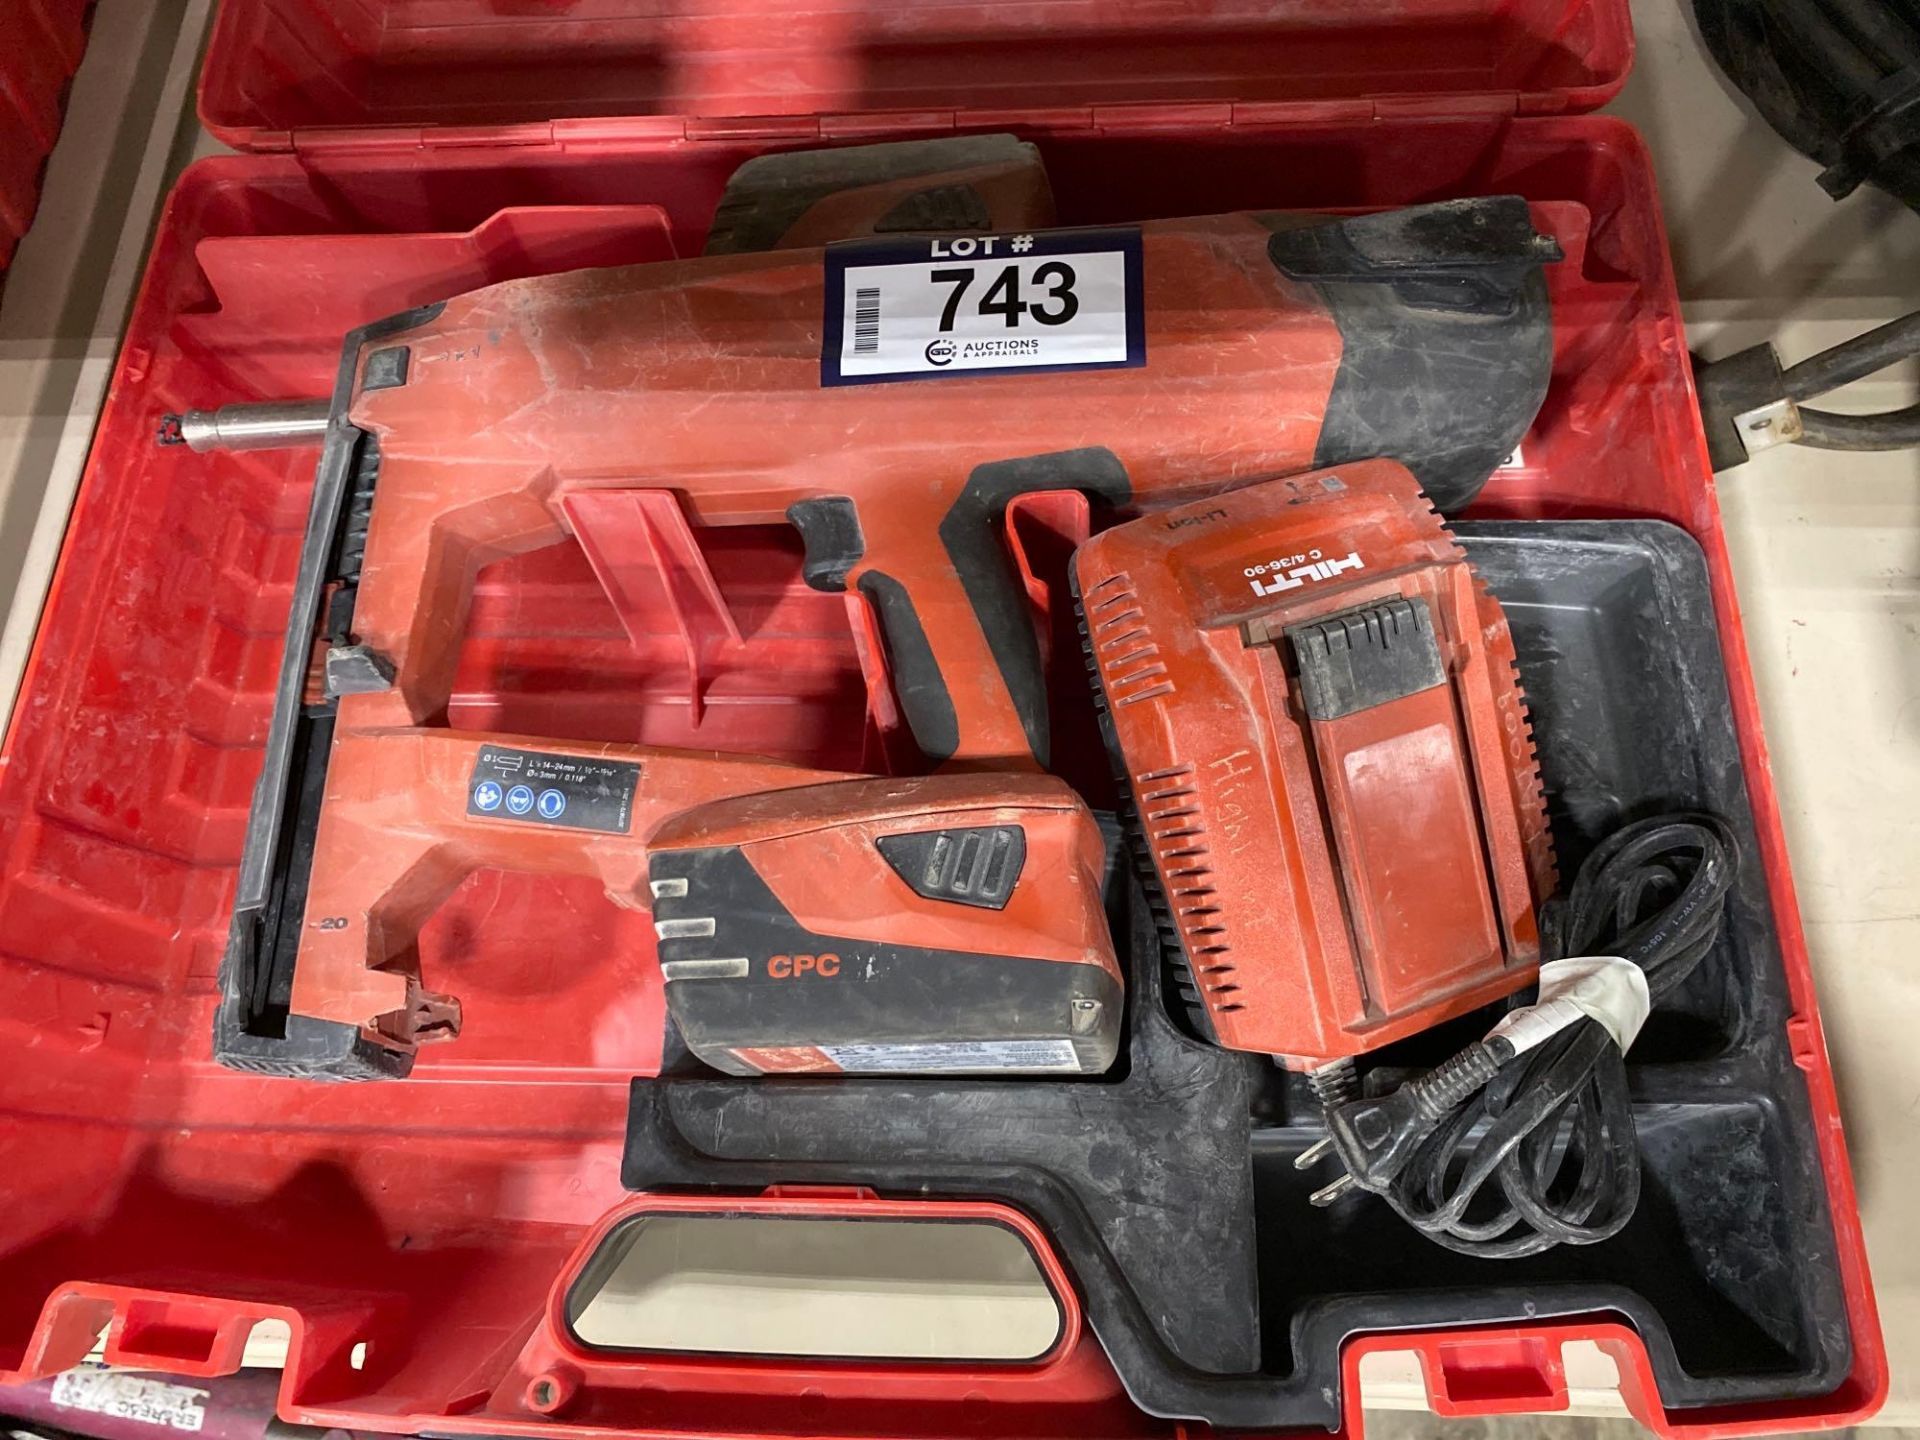 Hilti BX3 Cordless Fastening Tool w/ Battery, Charger, etc. - Image 2 of 4